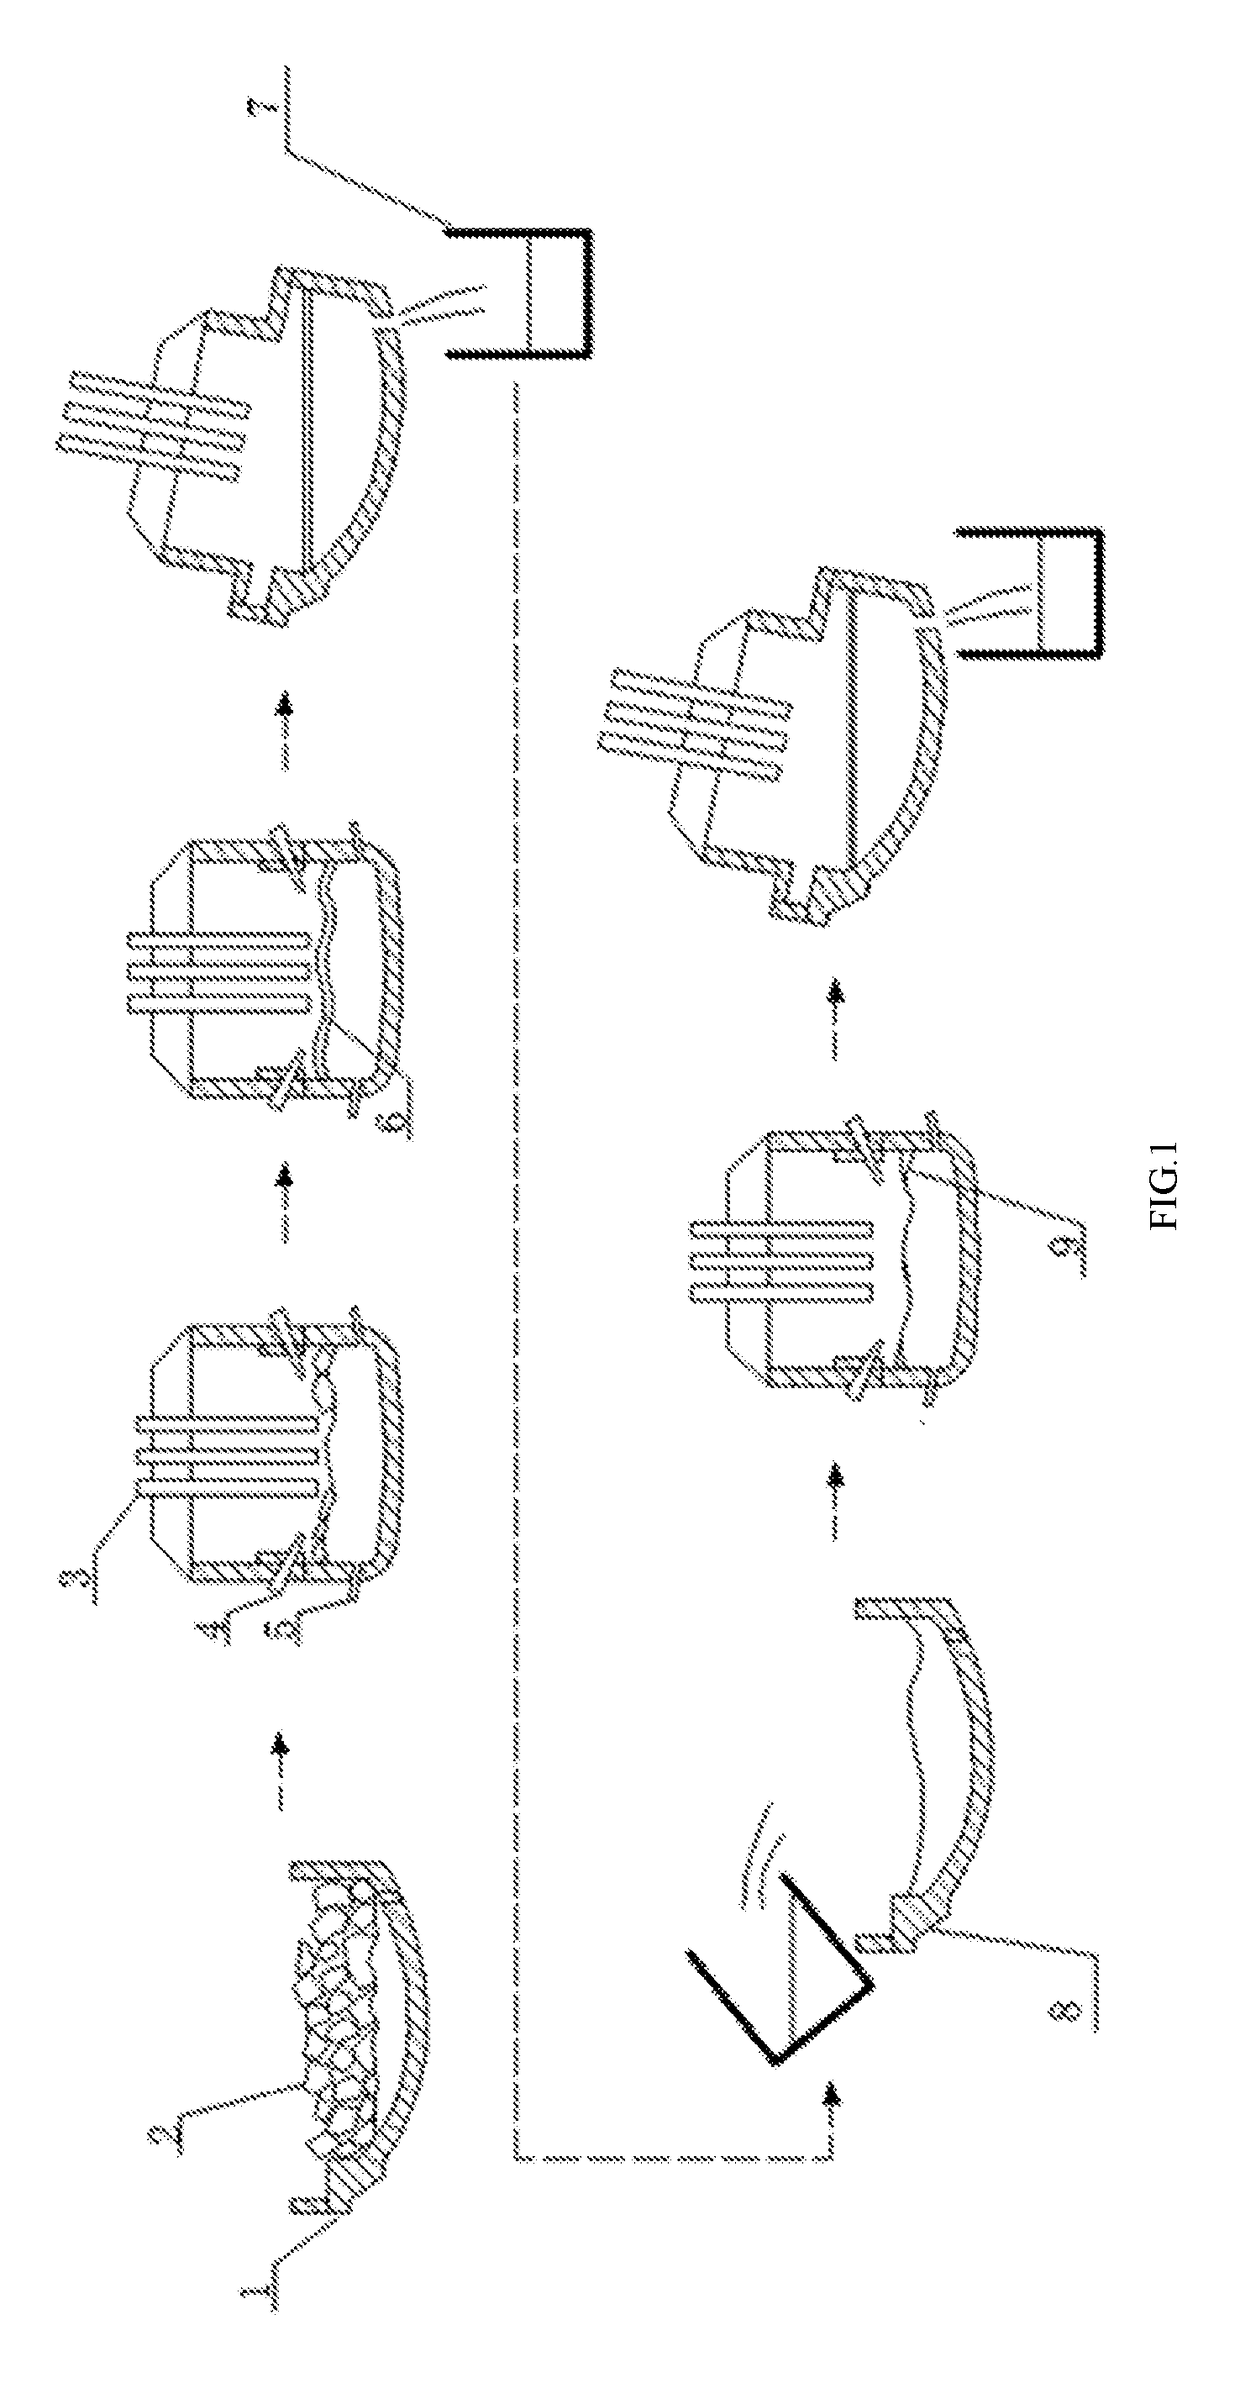 Production method for smelting clean steel from full-scrap steel using duplex electric arc furnaces